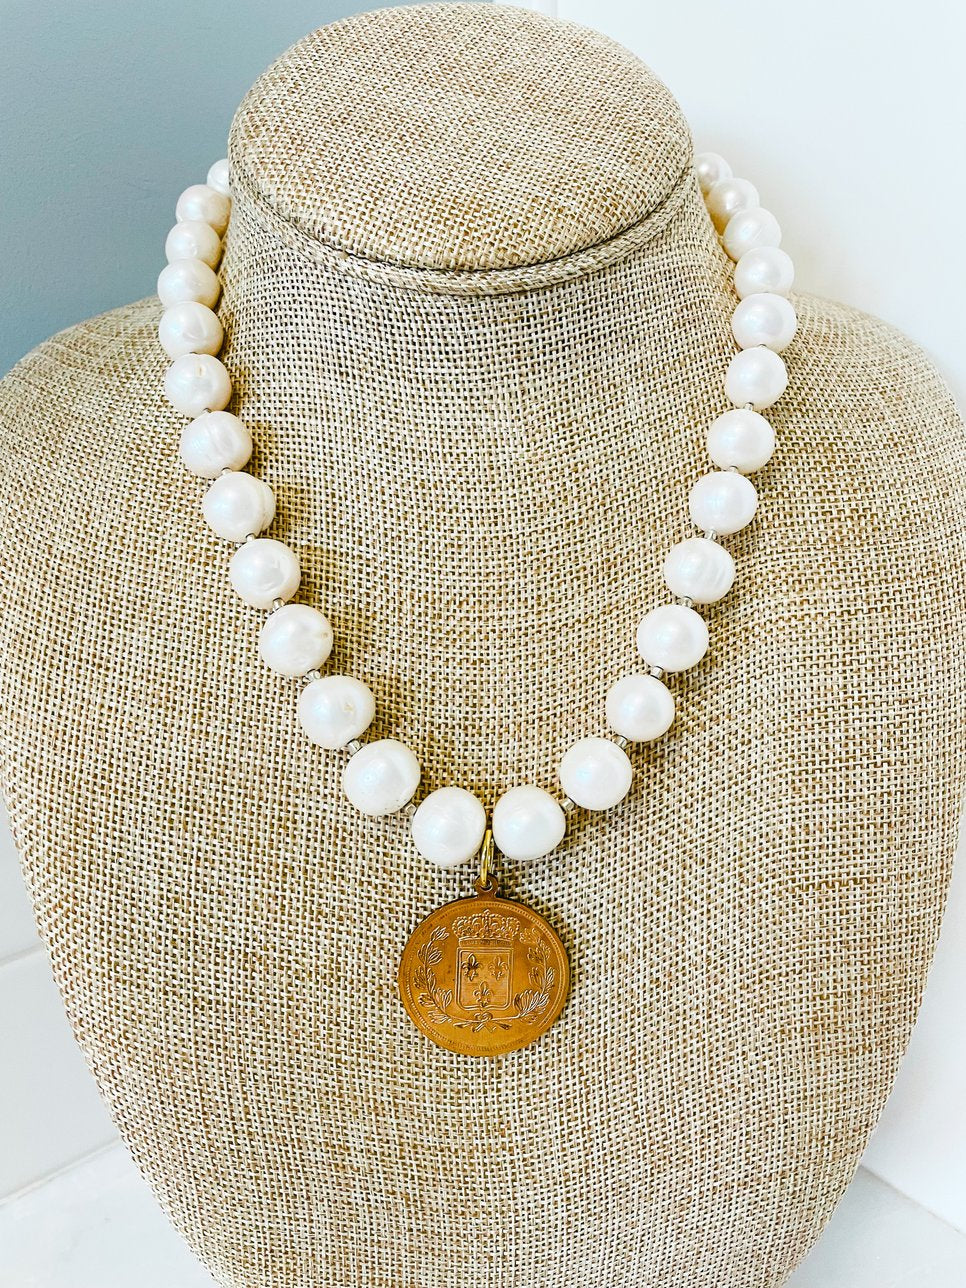 French coin pendant and freshwater pearls